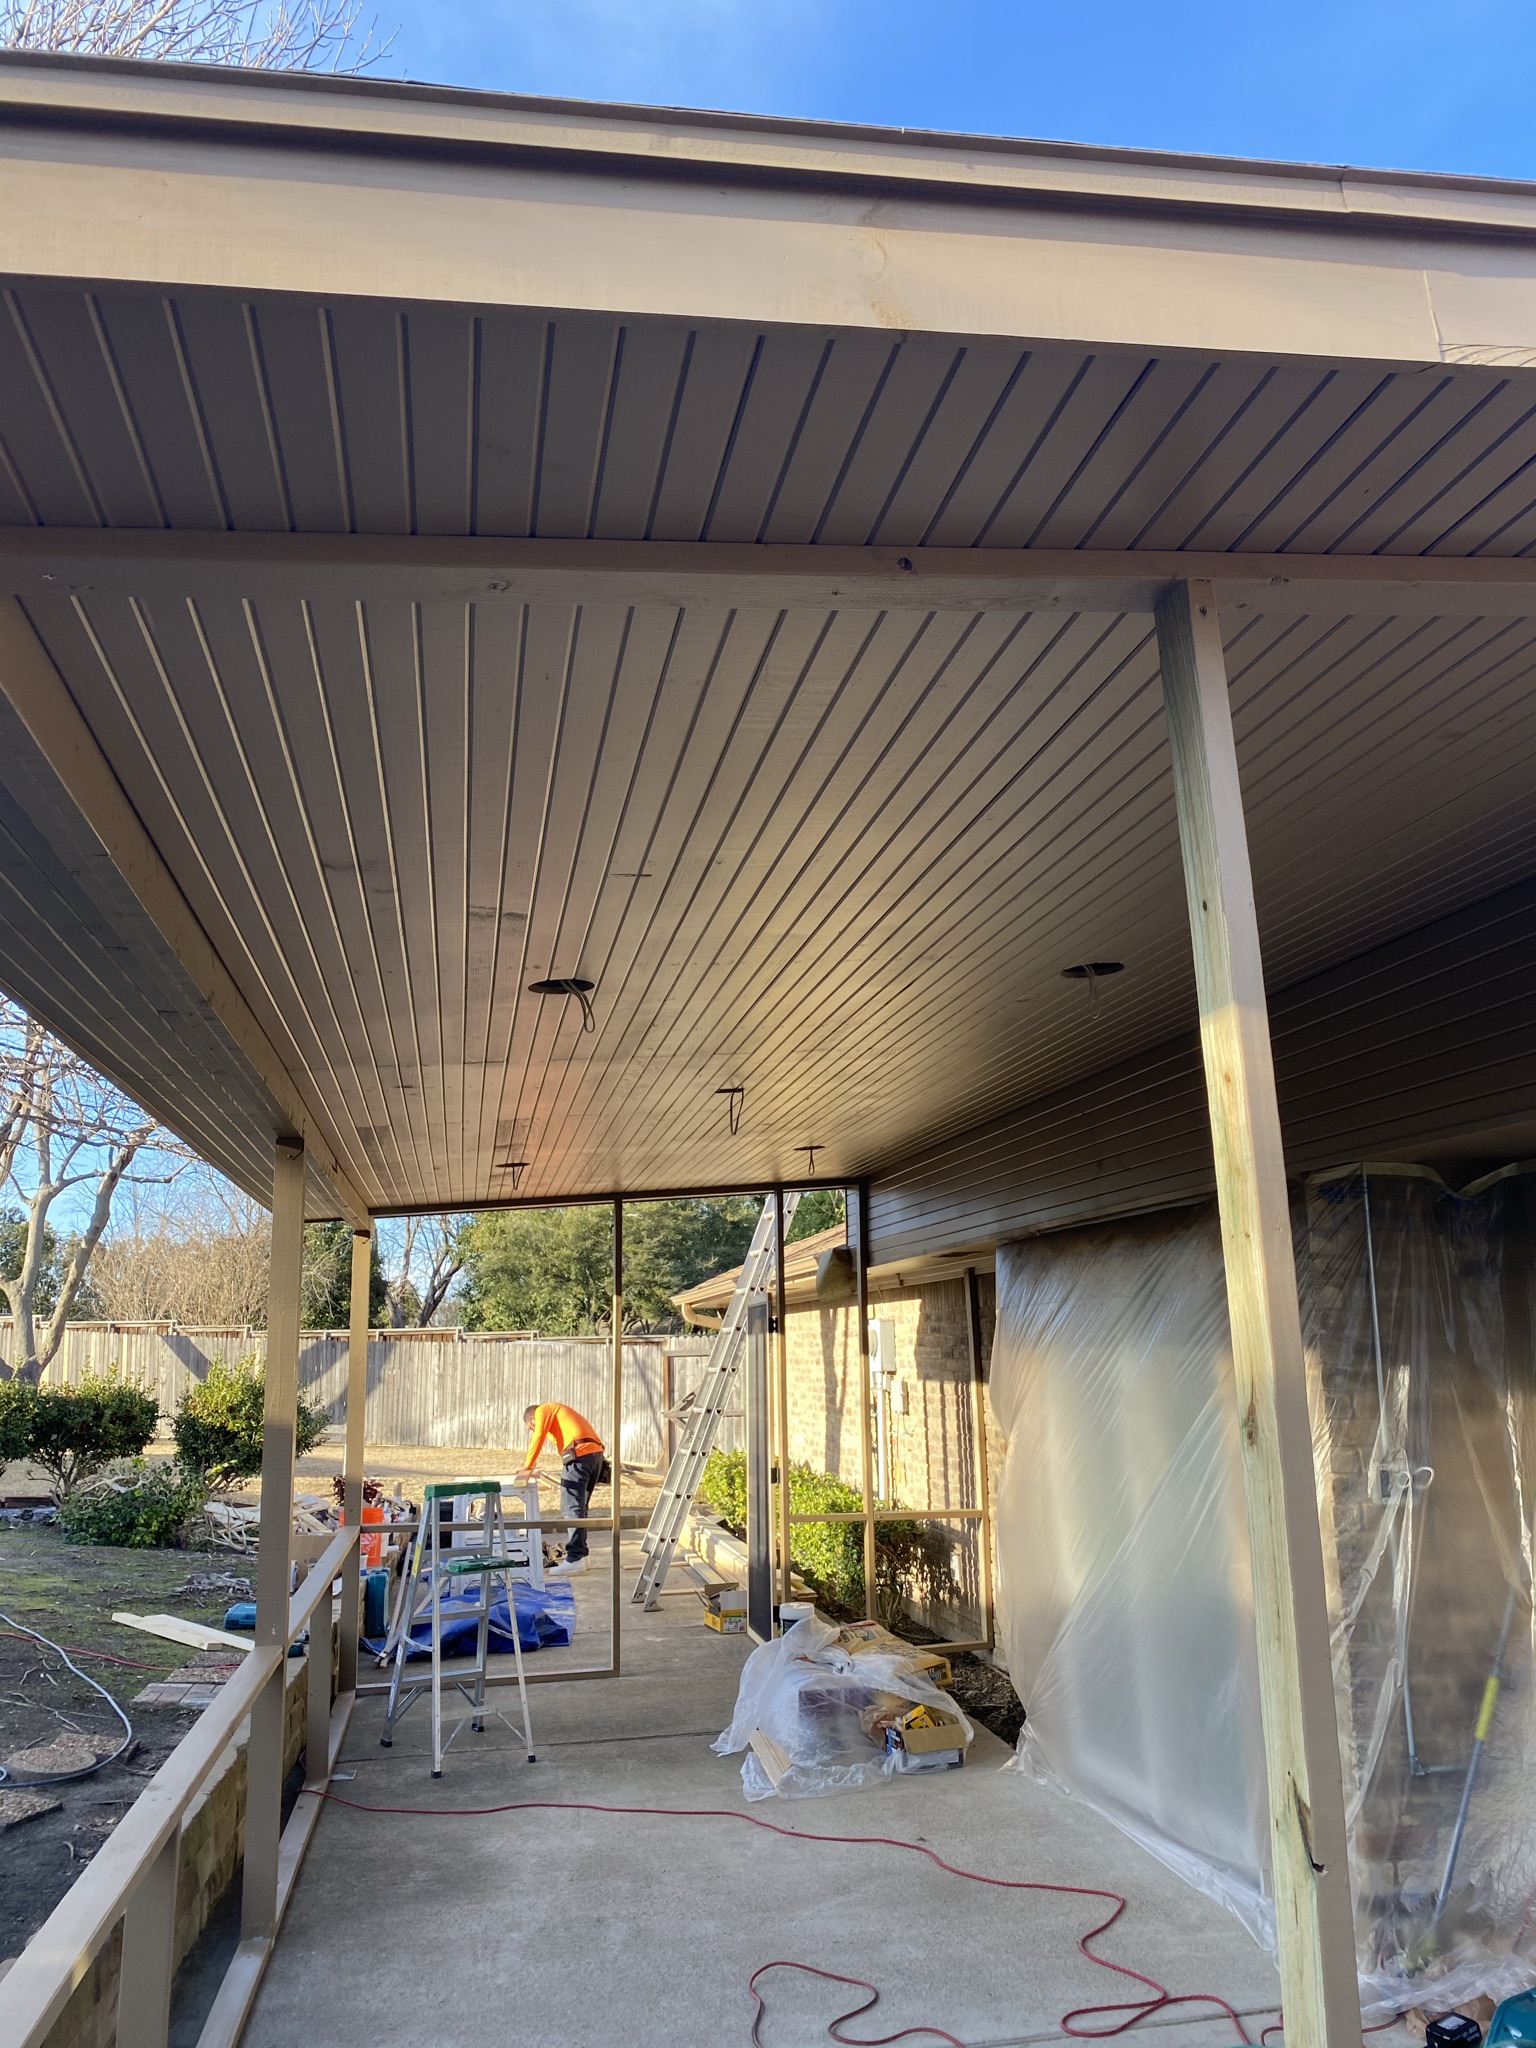 Patio builders from Jenkins Roofing working on patio project in Arlington, Texas with custom roof lighting